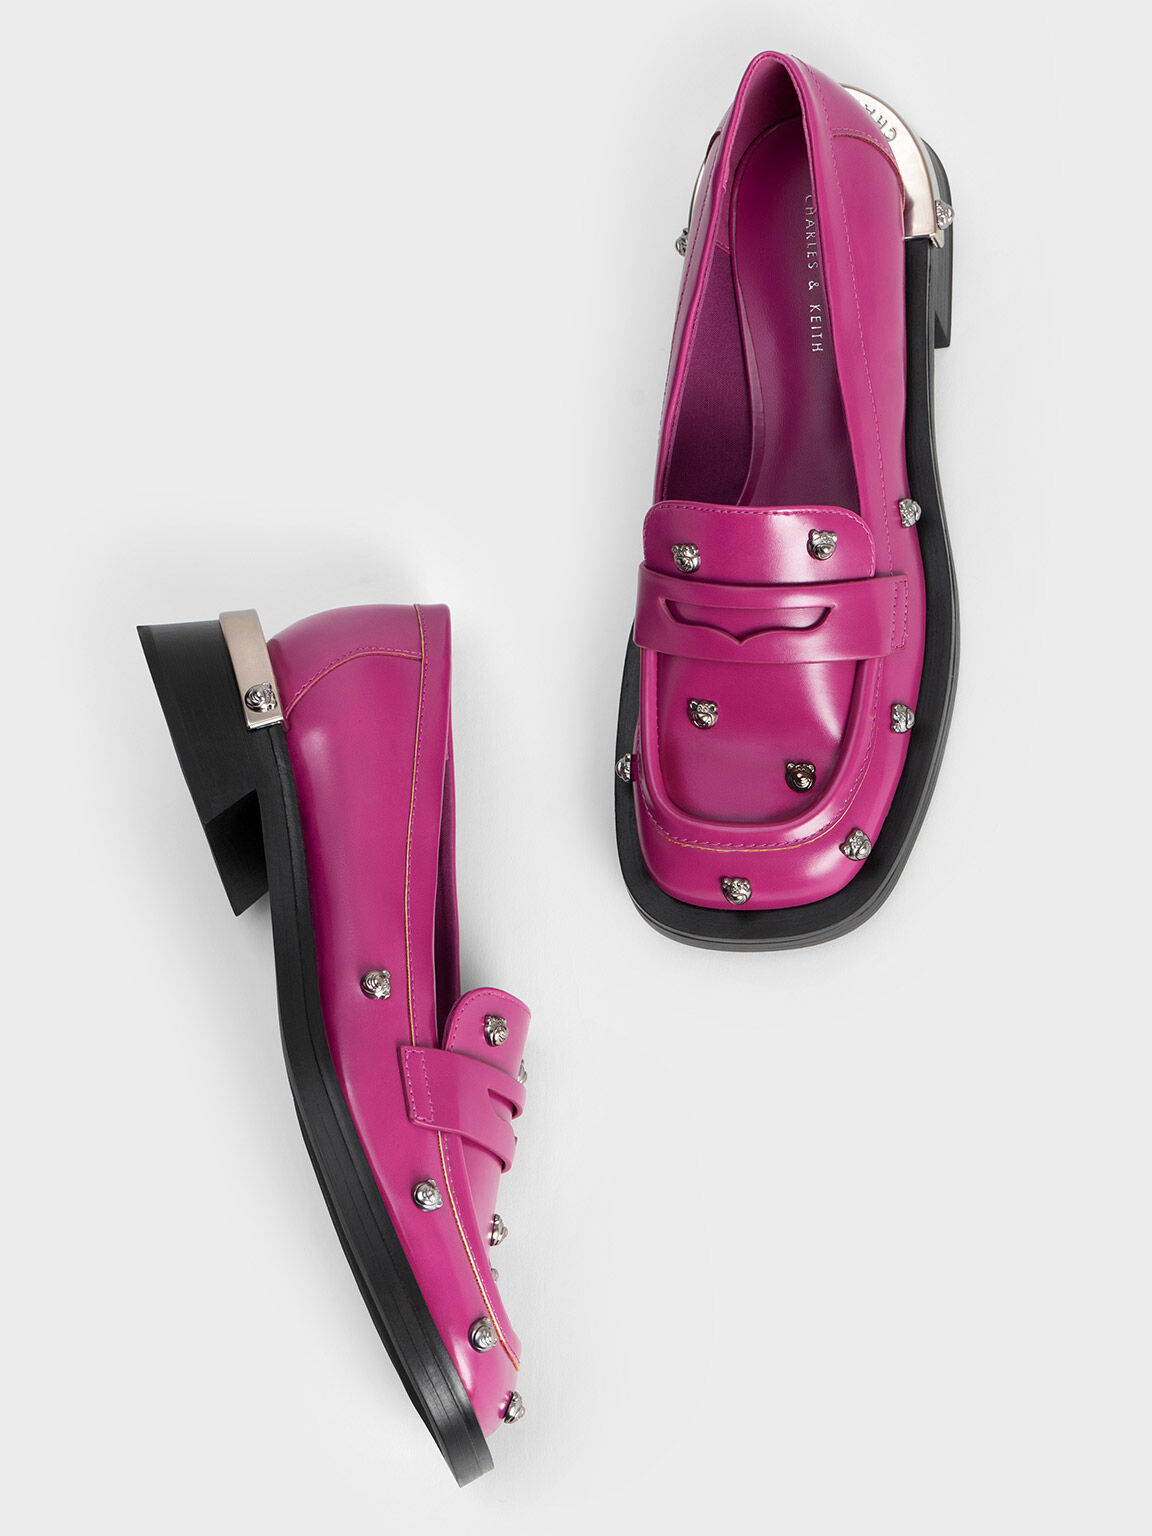 Lotso Studded Penny Loafers, Fuchsia, hi-res